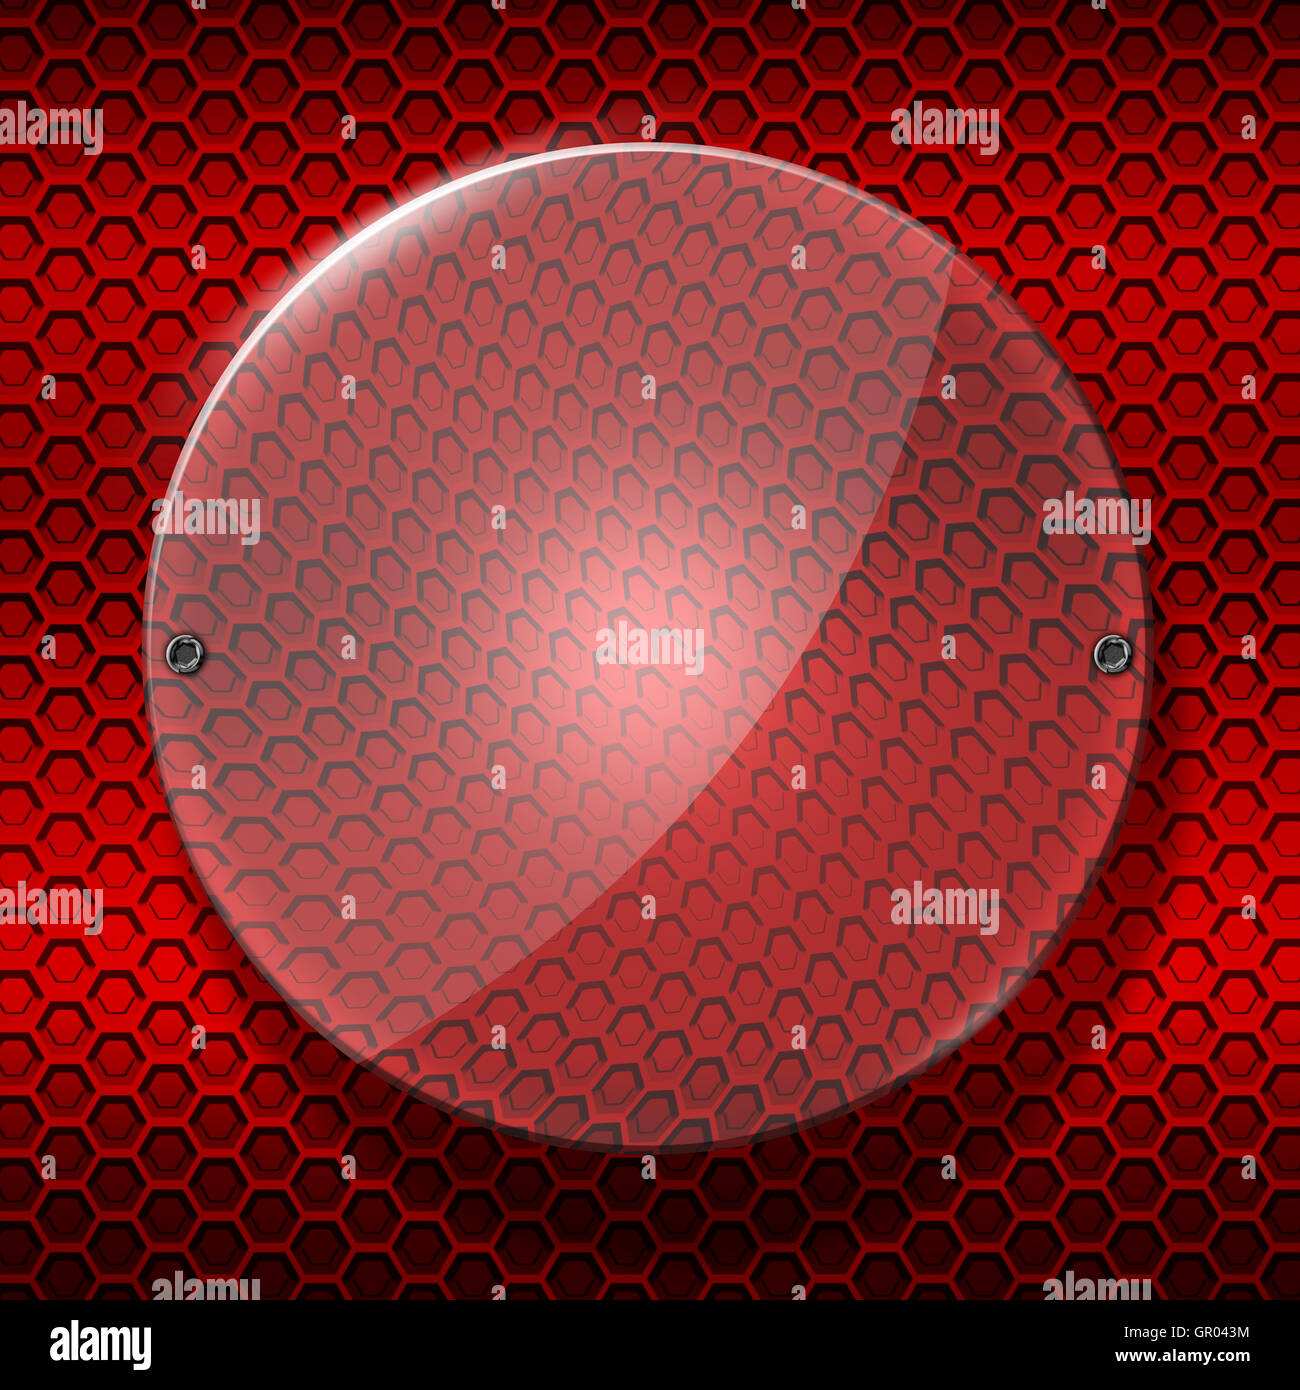 set 8. circle glossy glass with rivet on red metallic mesh wall. 3d illustration background. Stock Photo